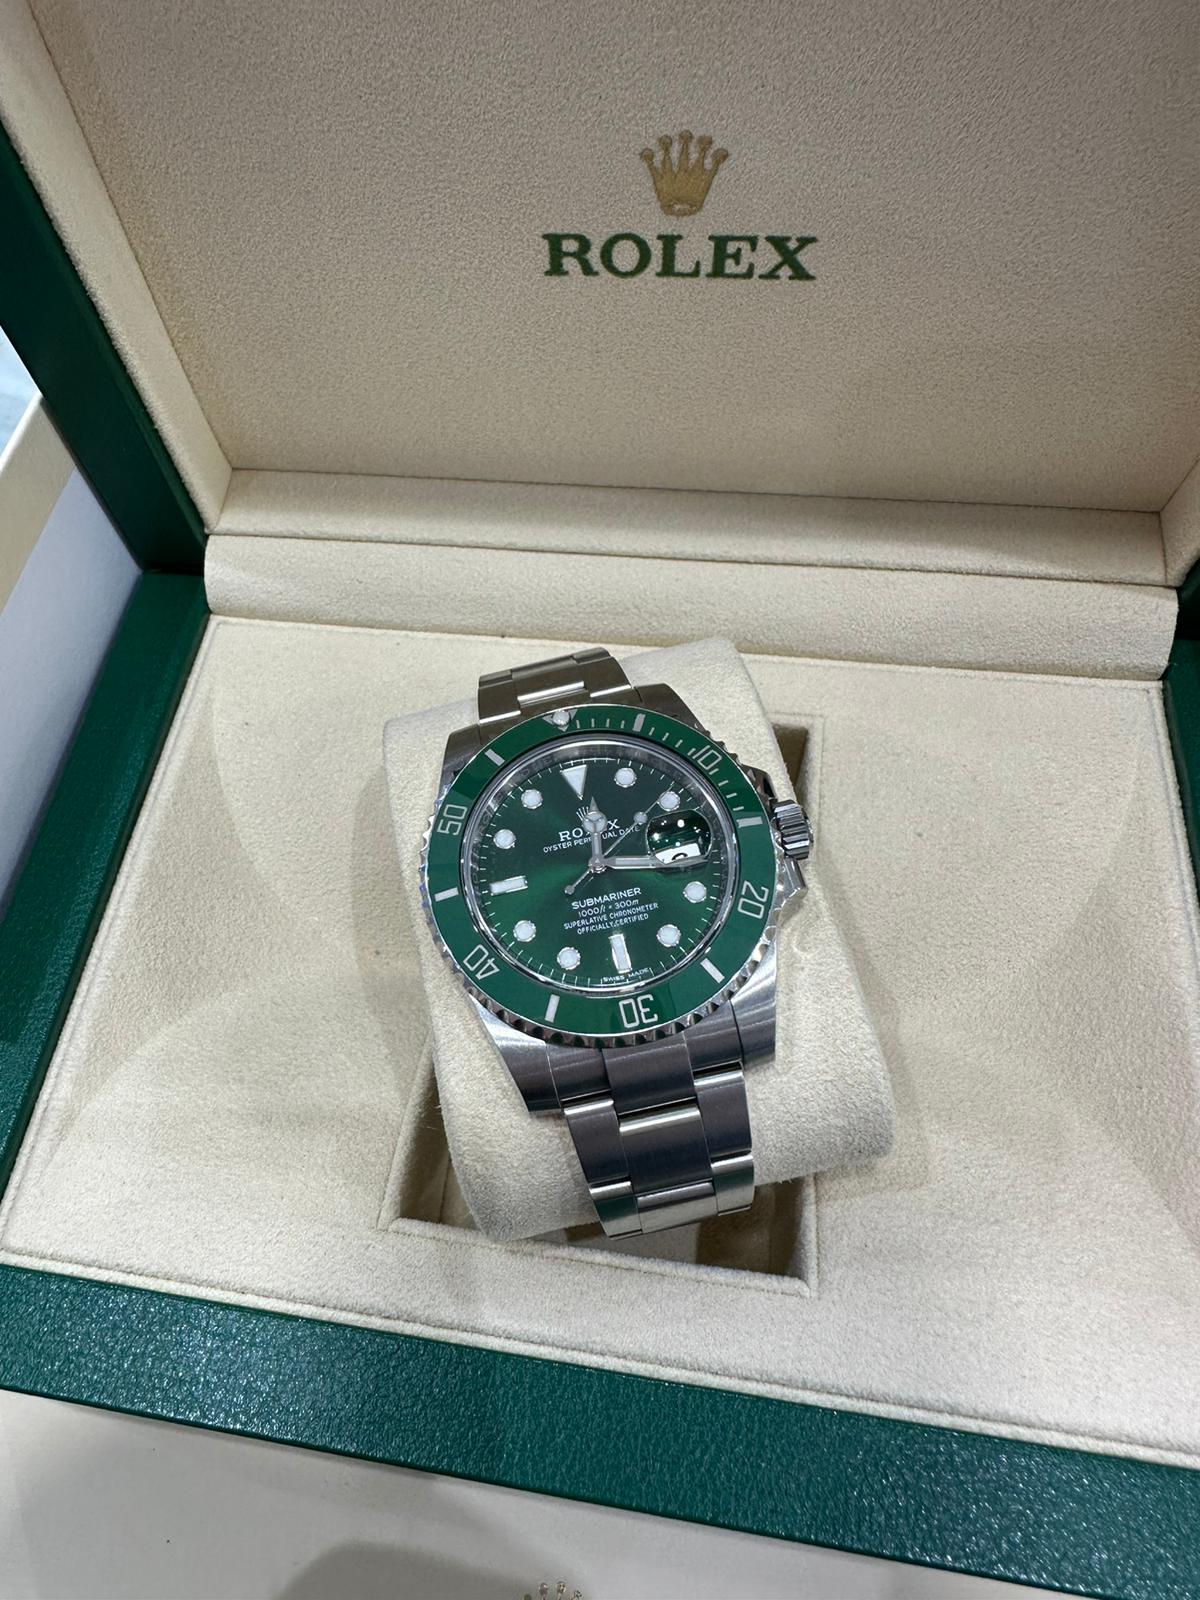 Rolex Submariner Hulk discontinued watch 2019 with - Image 9 of 10